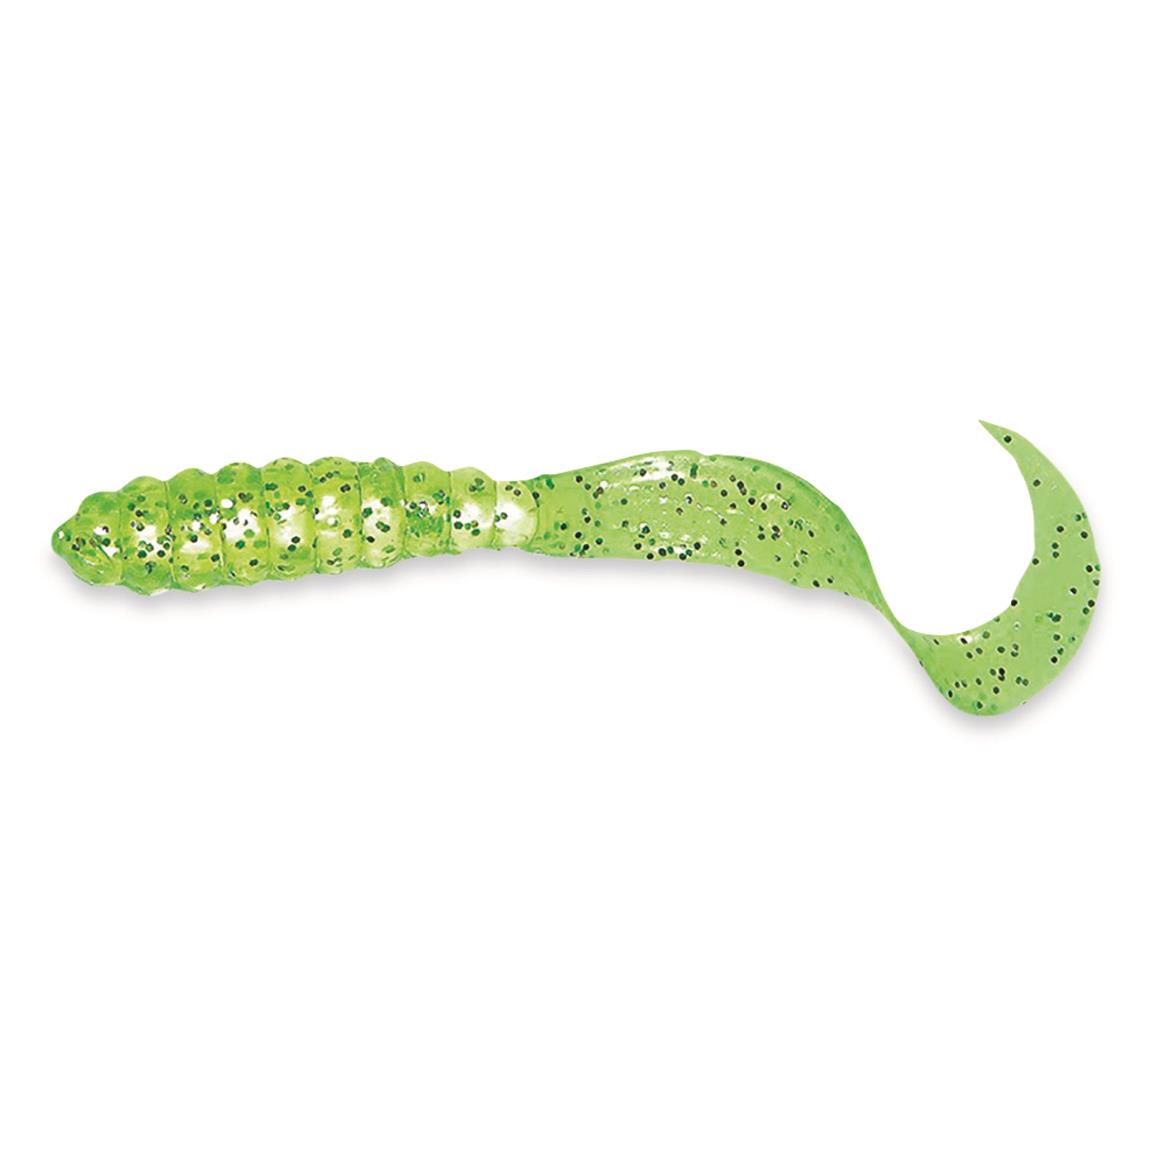 Mister Twister 3" Meeny Curly Tail Grub Lure, 20 Pack, Chartreuse Glitter